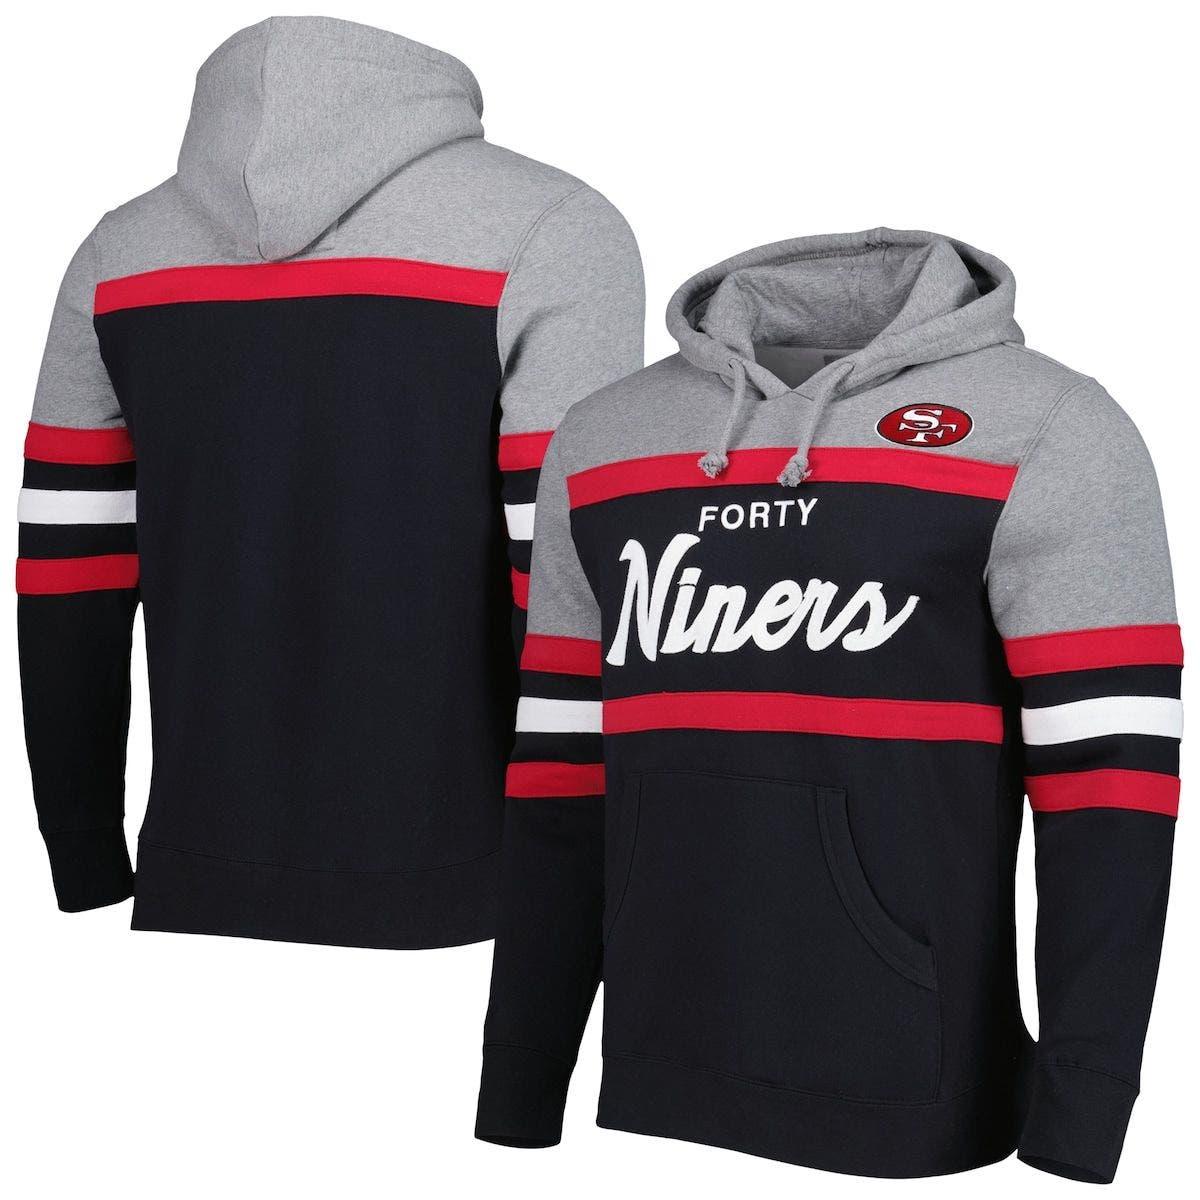 Men's Mitchell & Ness Navy/Heather Gray Tampa Bay Lightning Head Coach Pullover Hoodie Size: Large